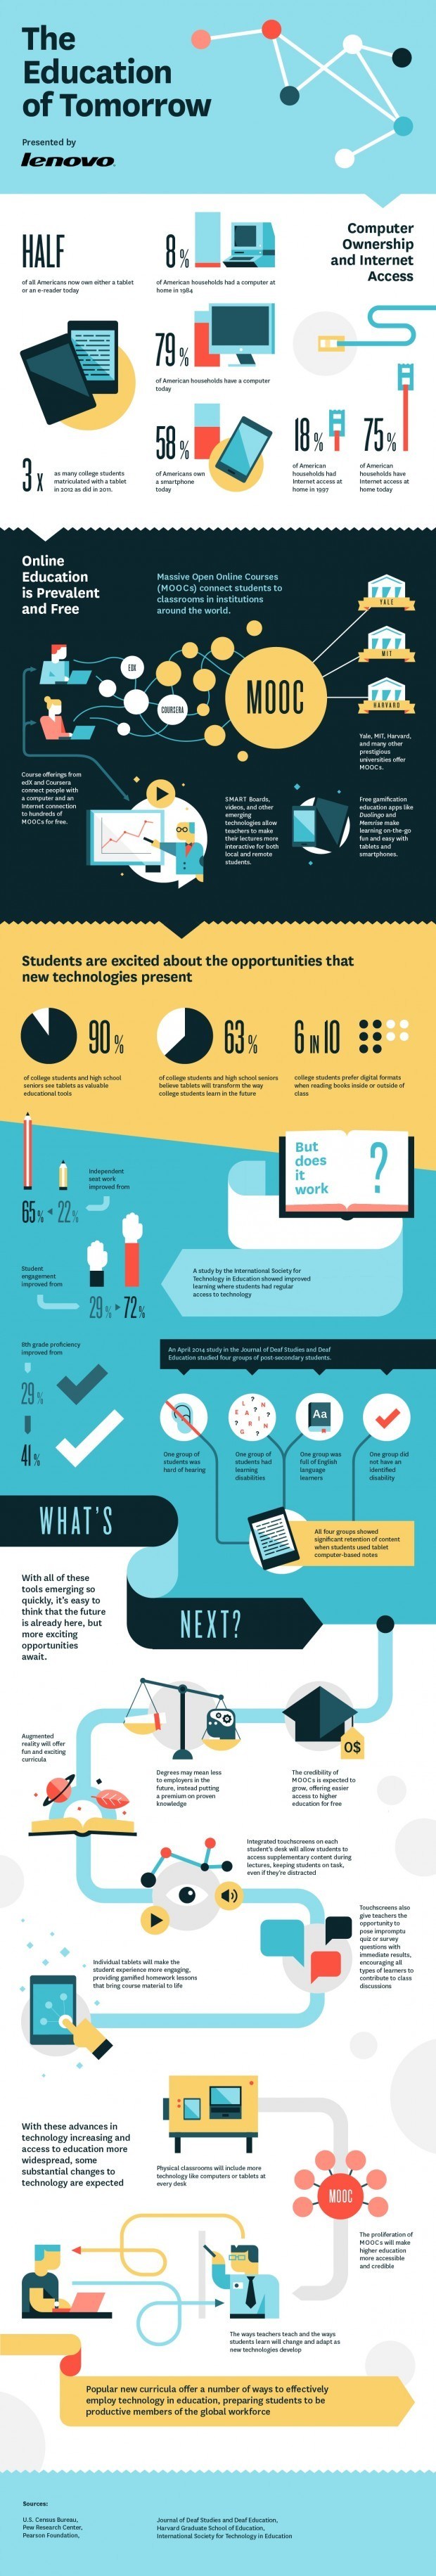 What-Is-This-The-Future-Of-Education-Infographic